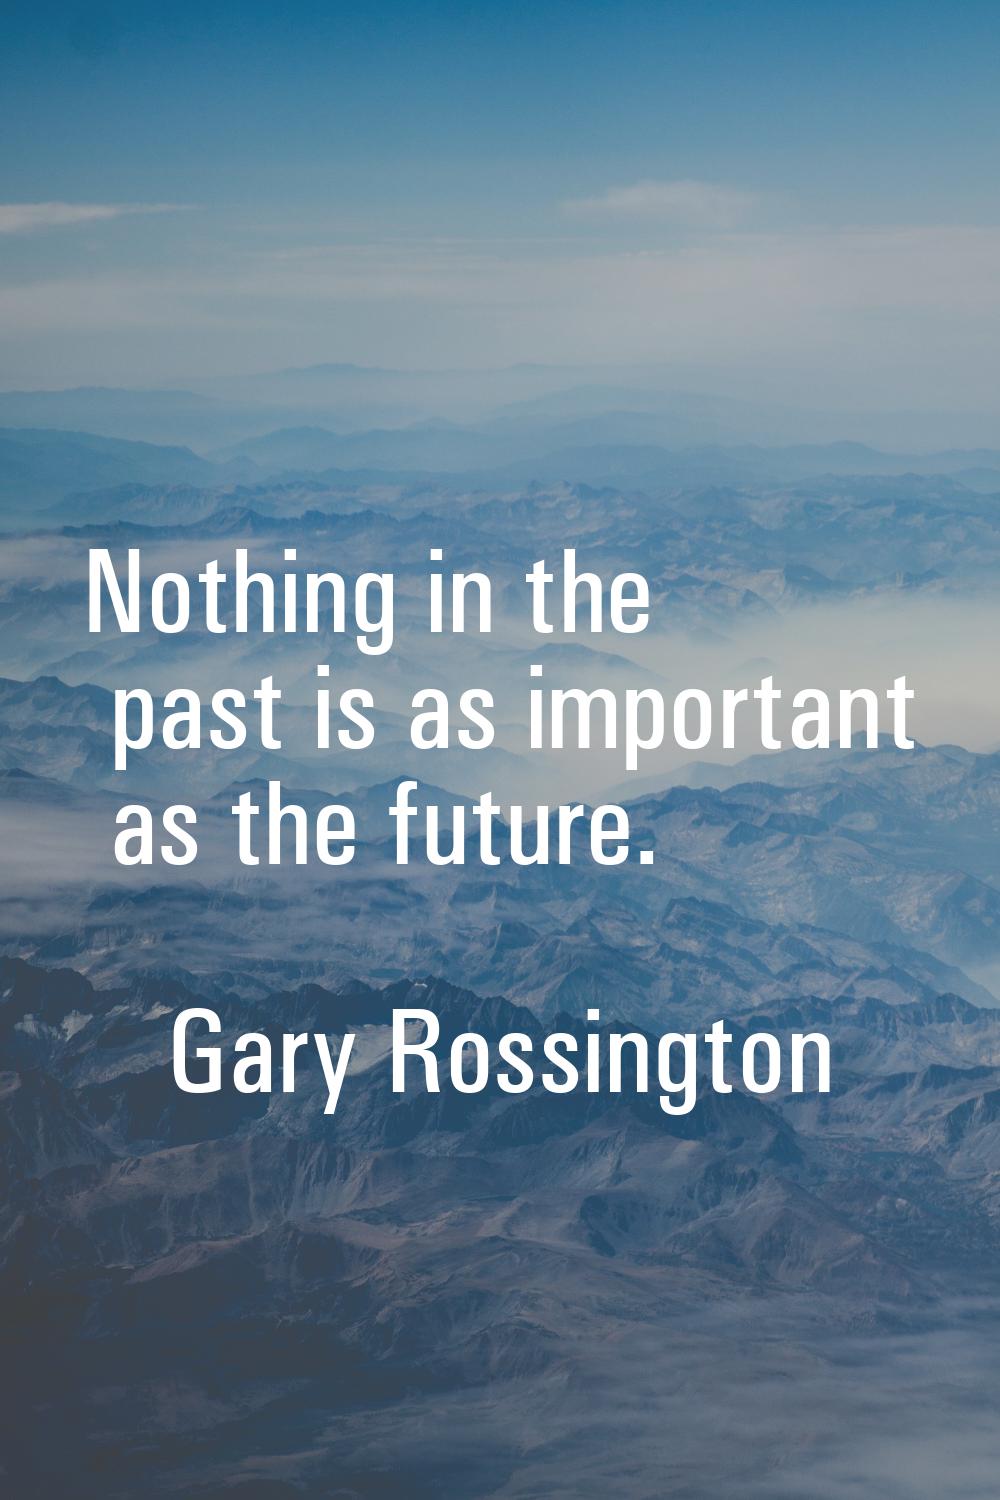 Nothing in the past is as important as the future.